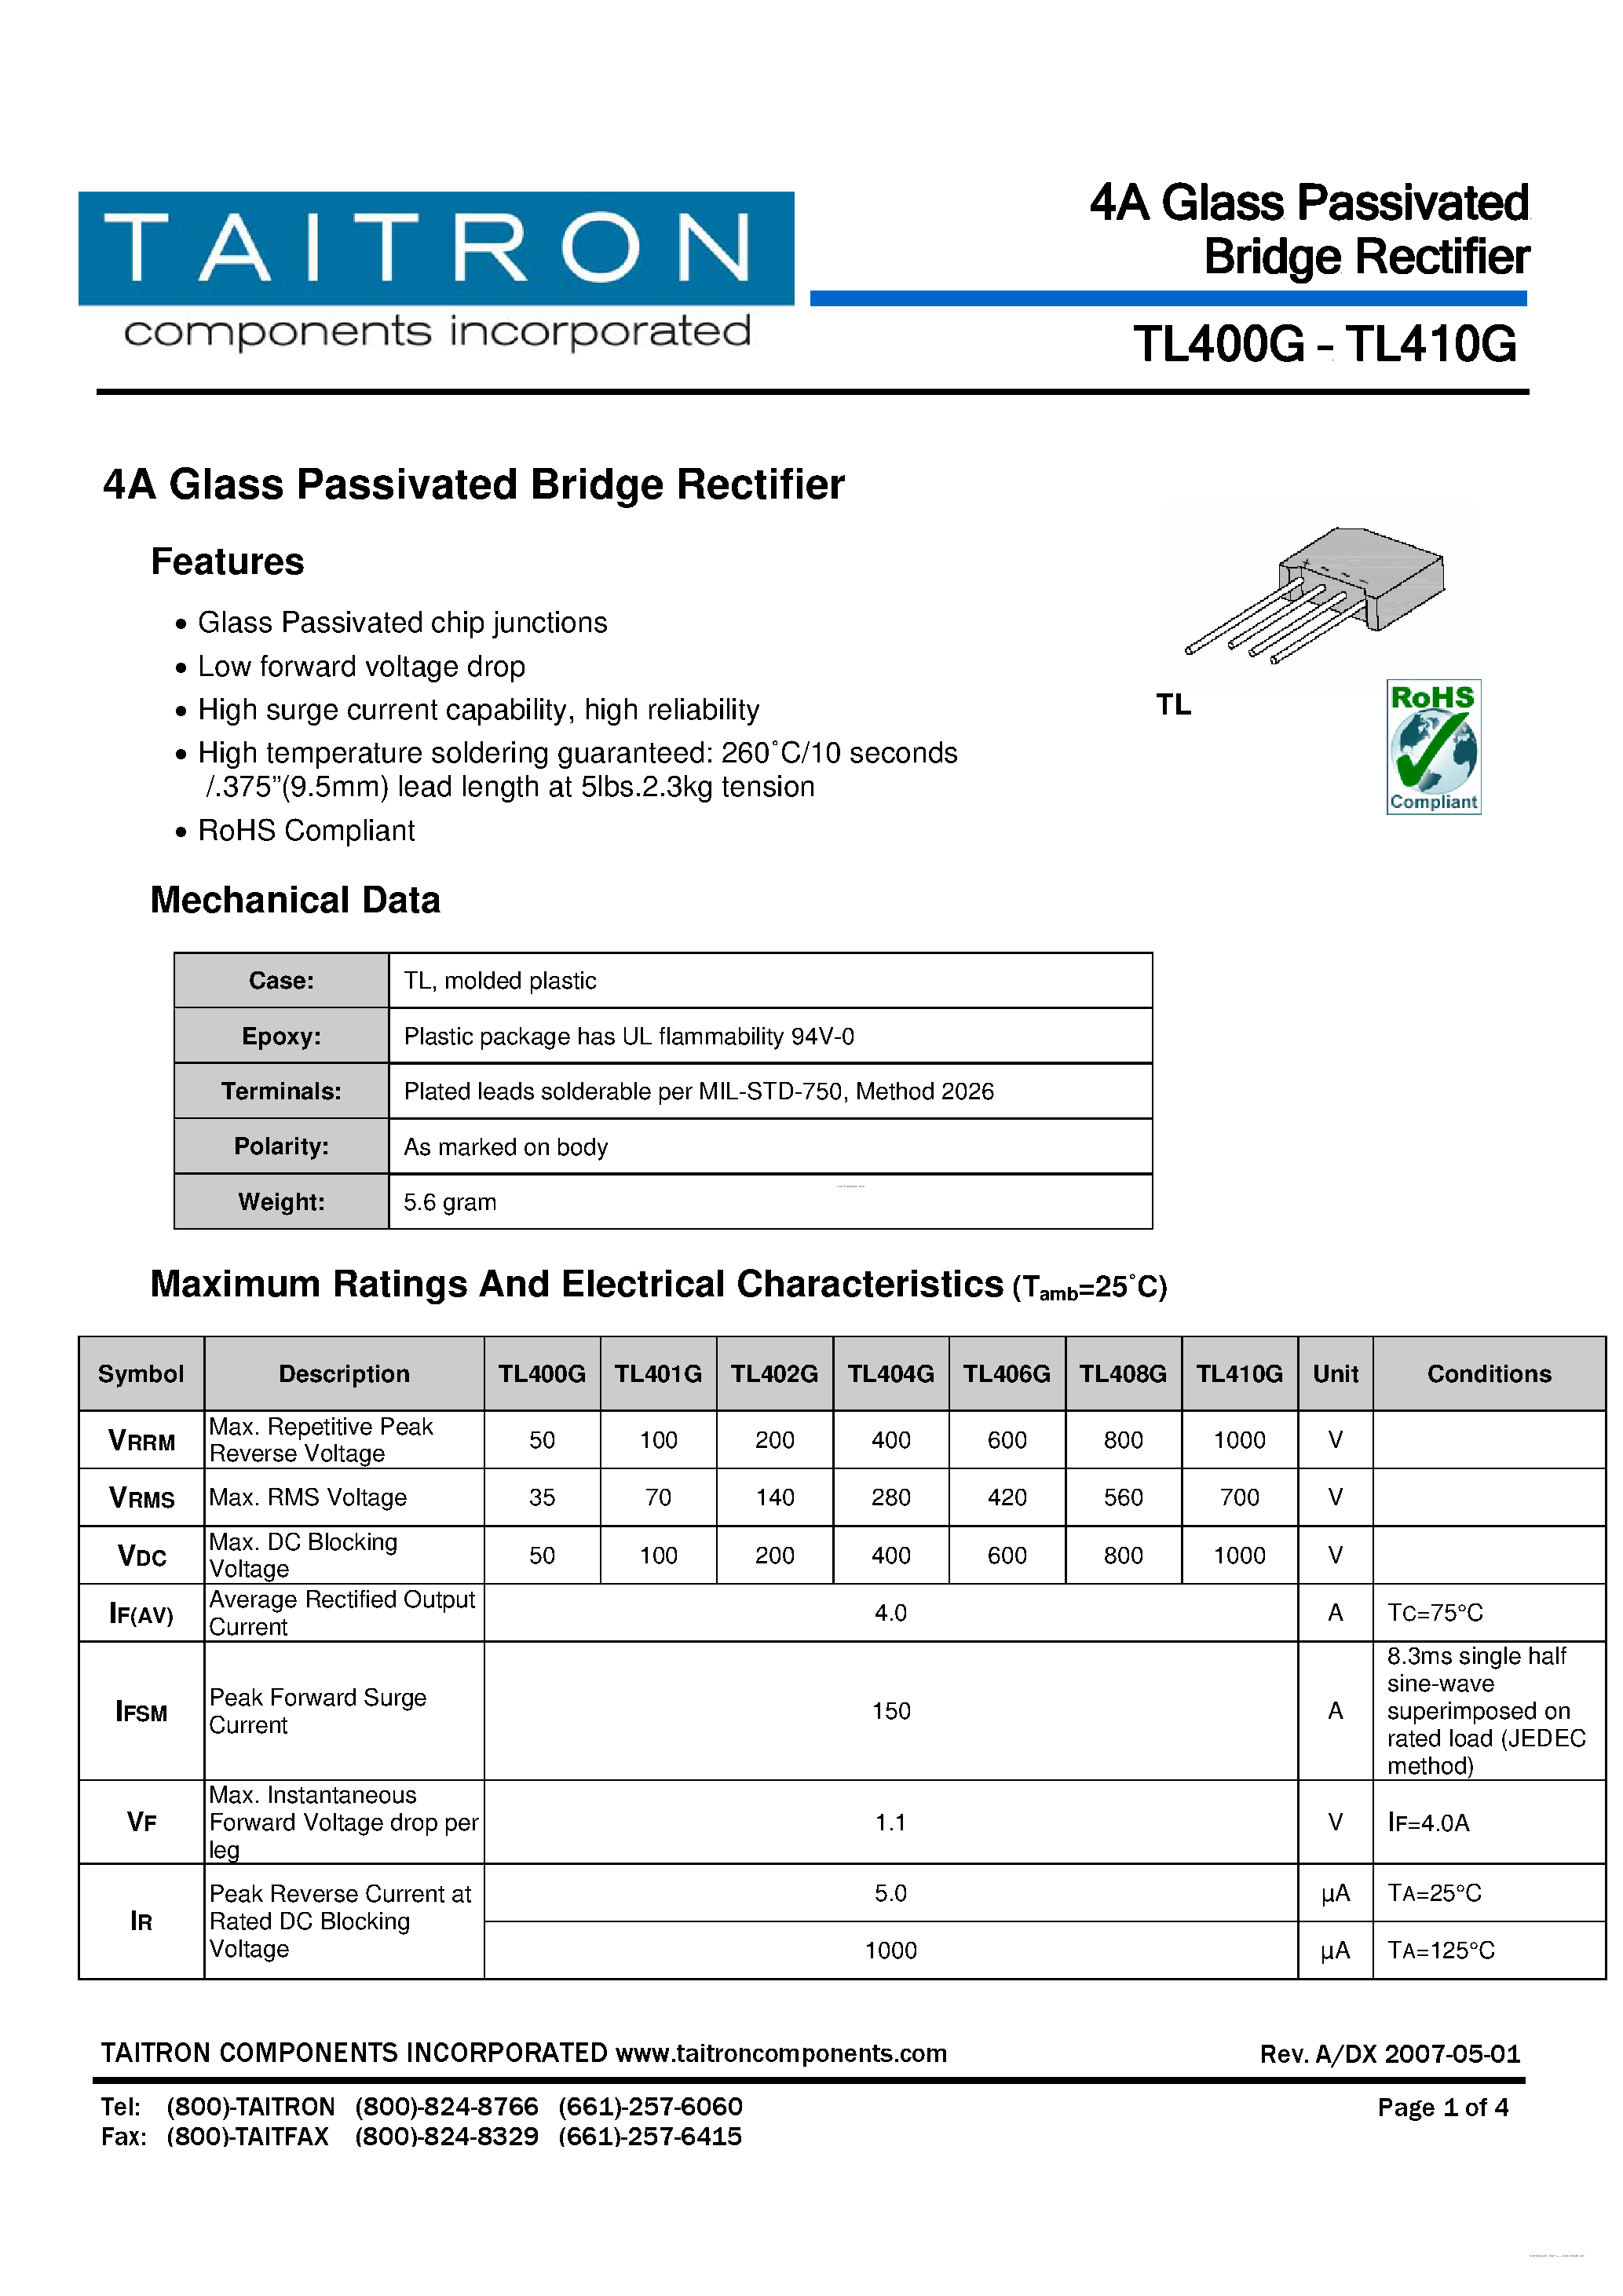 Datasheet TL400G - (TL400G - TL410G) 4A Glass Passivated Bridge Rectifier page 1